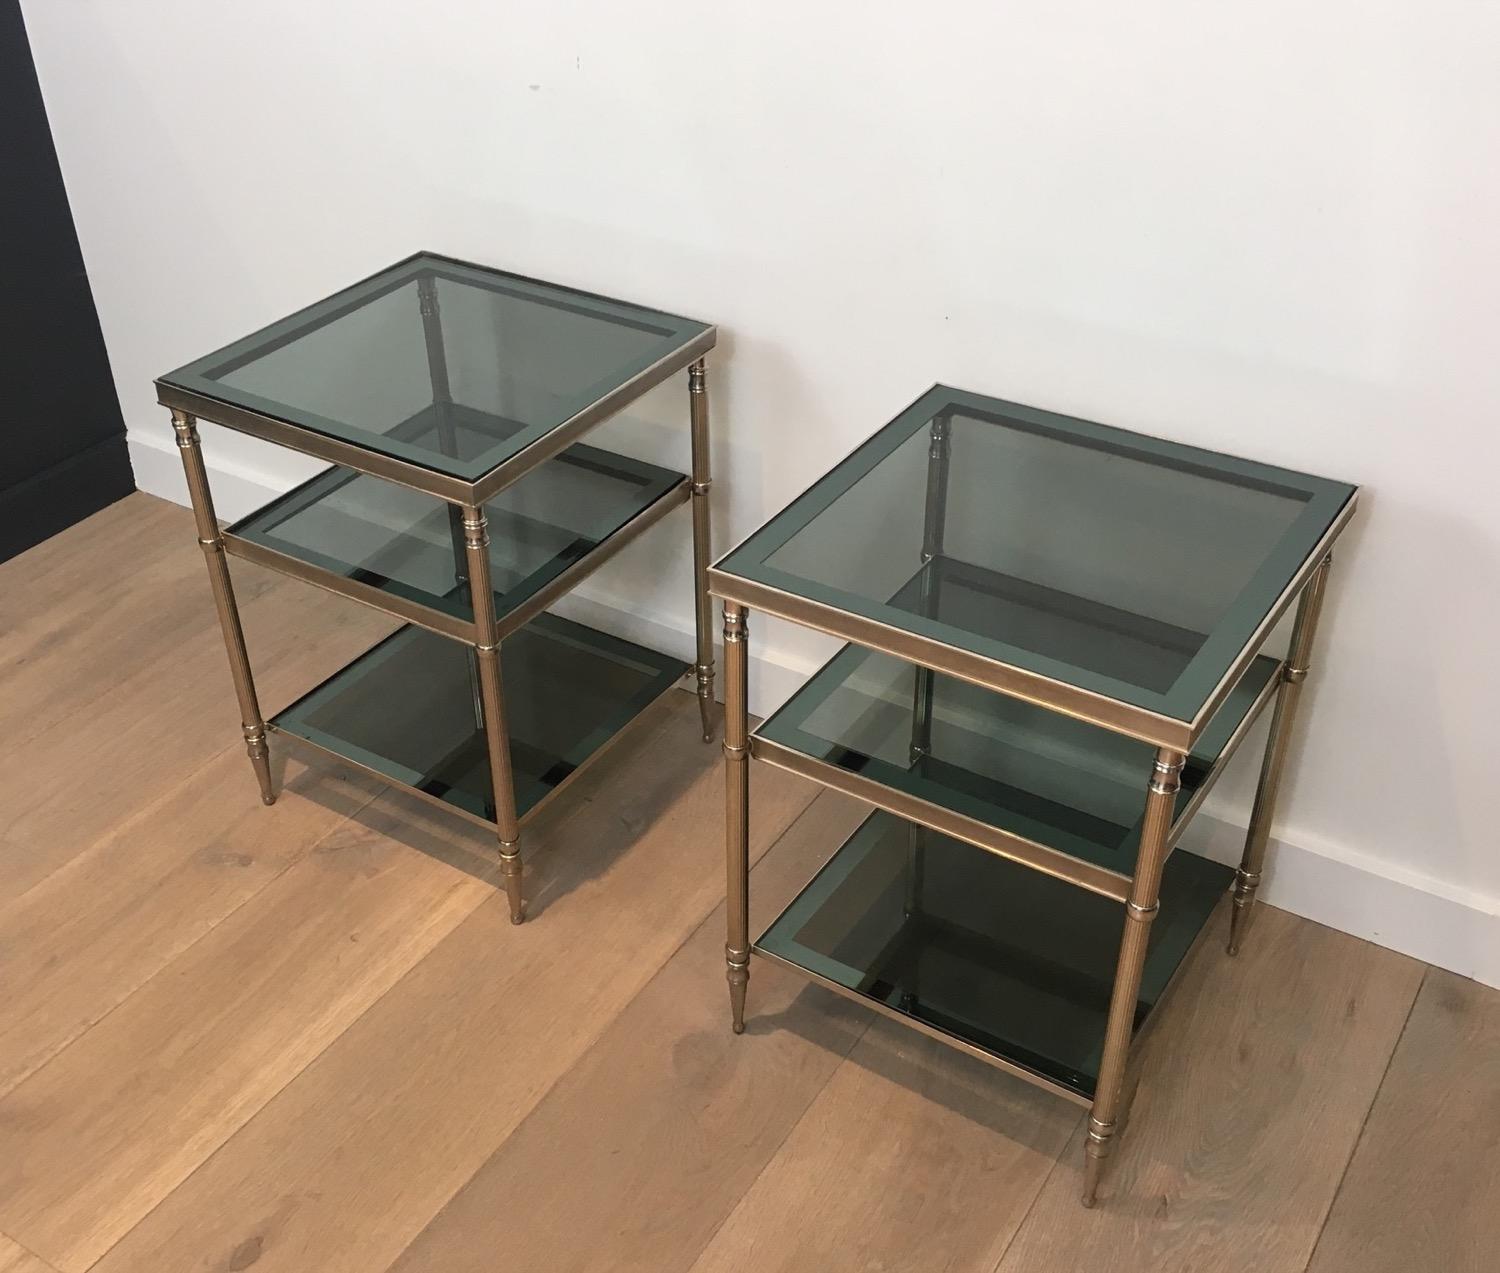 Attributed to Maison Jansen. Pair of silvered side tables with blueish glass shelves, French, circa 1960.